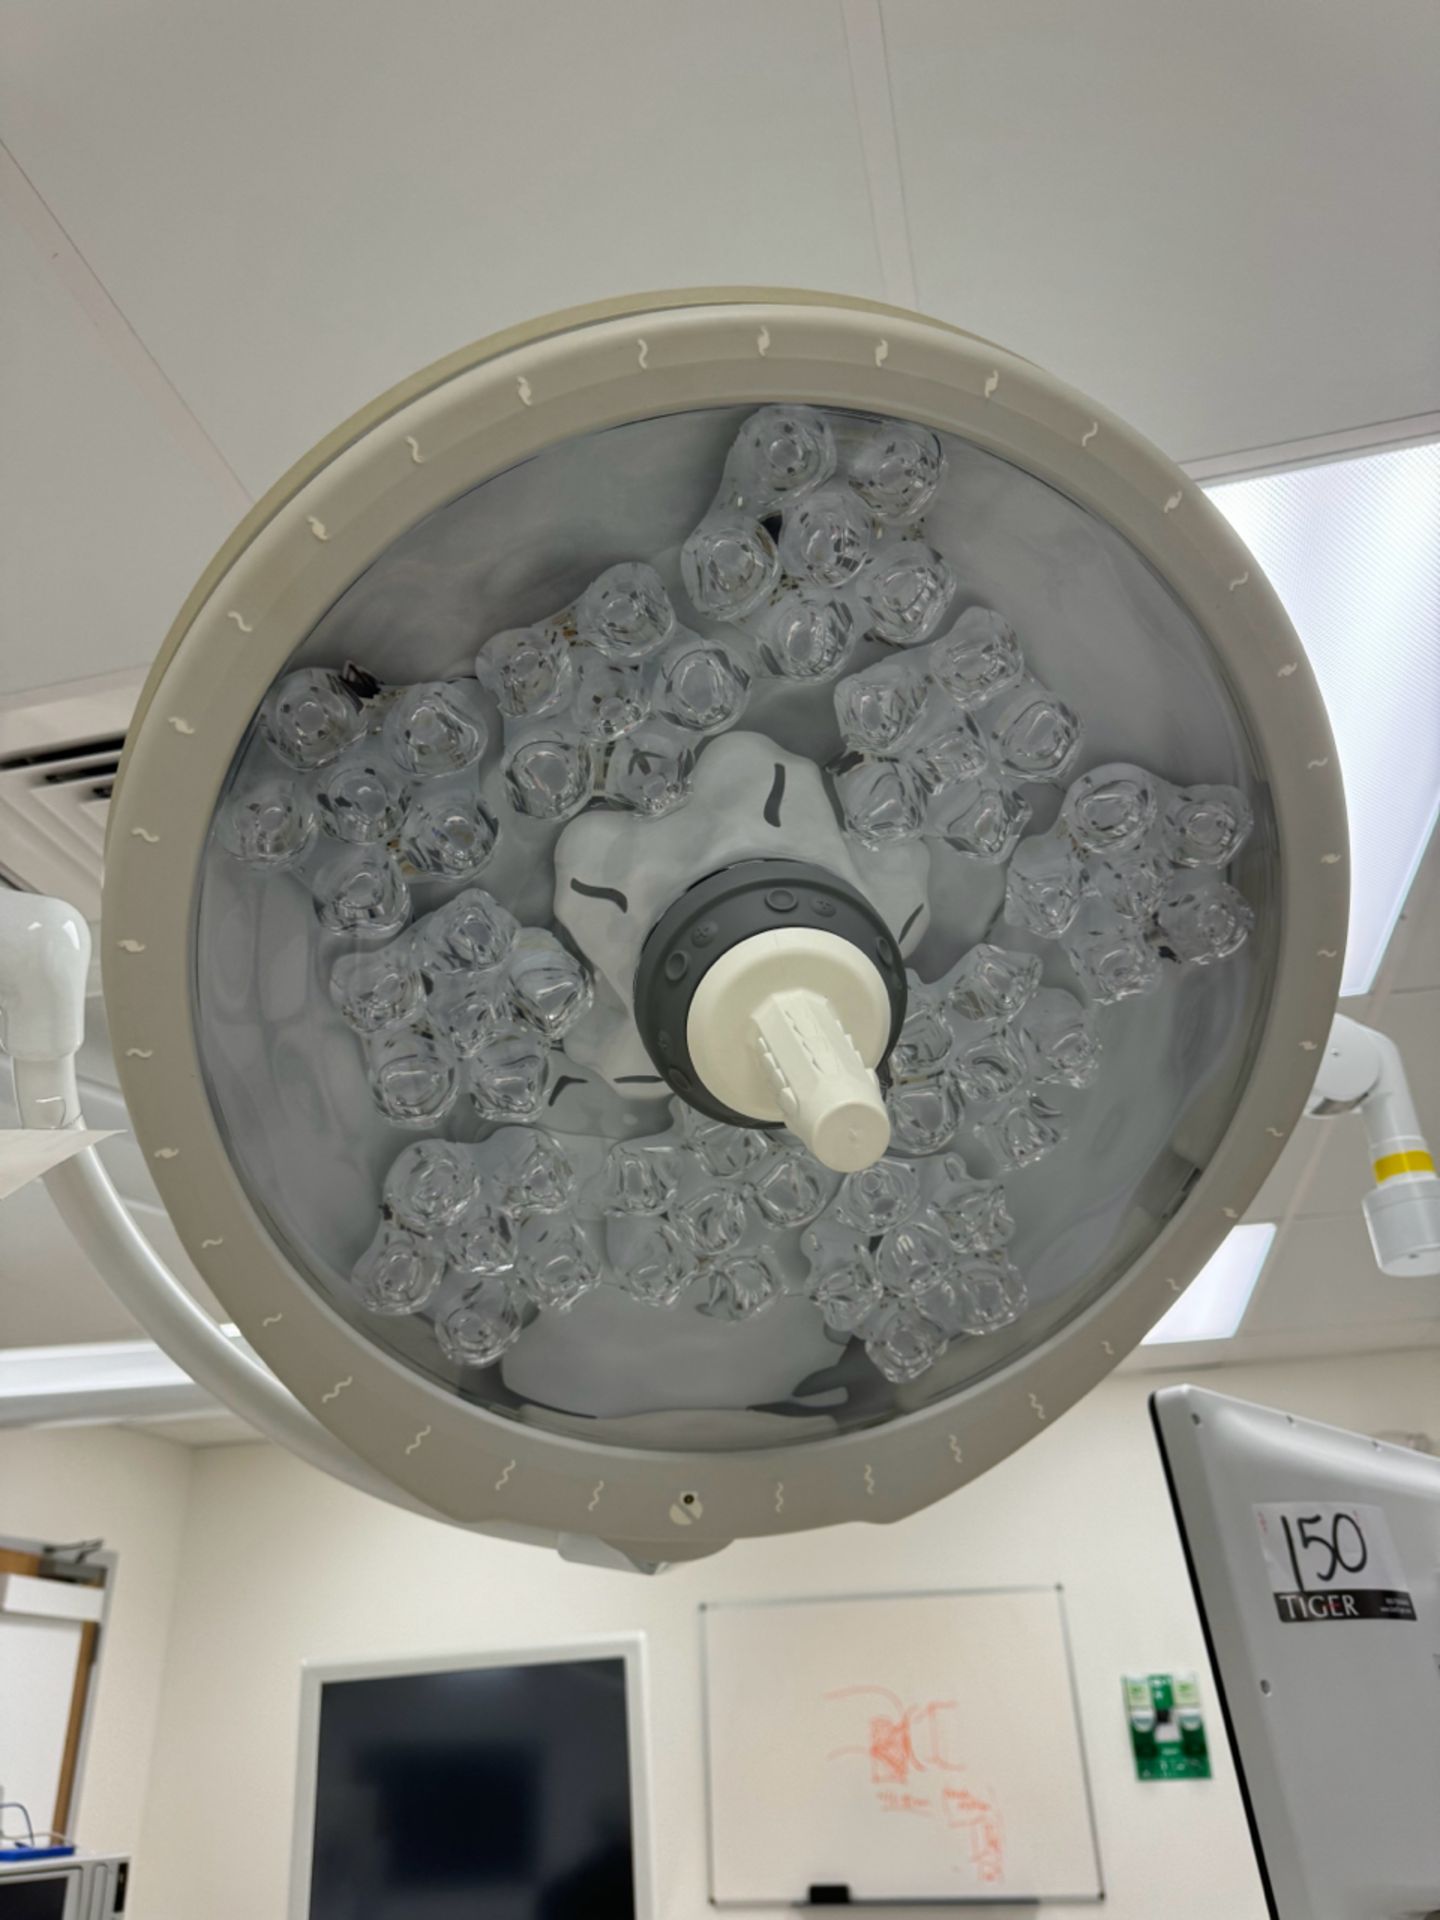 Steris Surgical Lighting System - Image 5 of 7